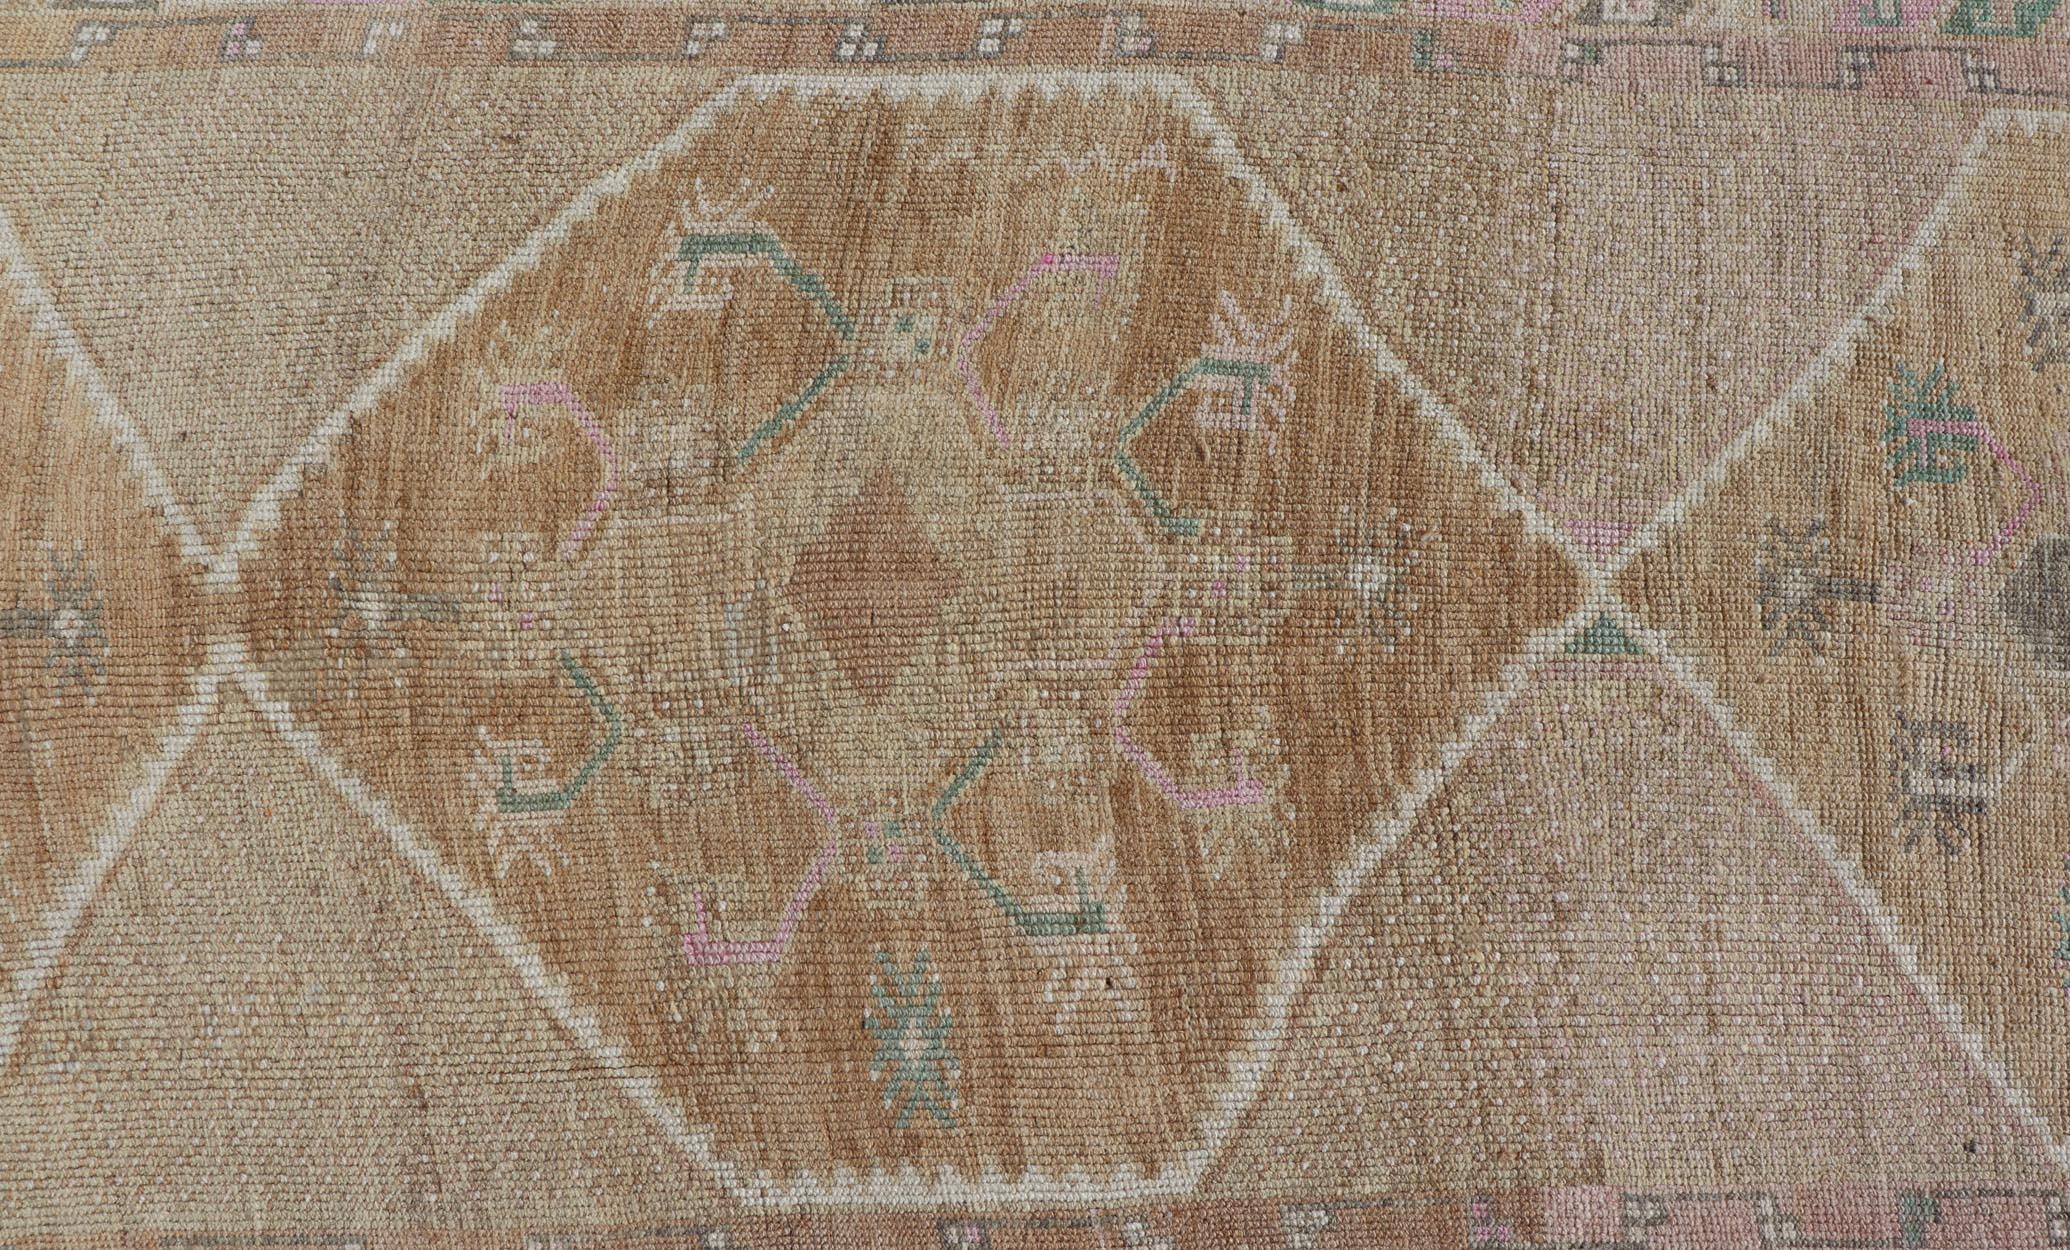 Unique & Colorful Turkish Kars Runner with Tribal Designs and Geometric Motifs For Sale 1